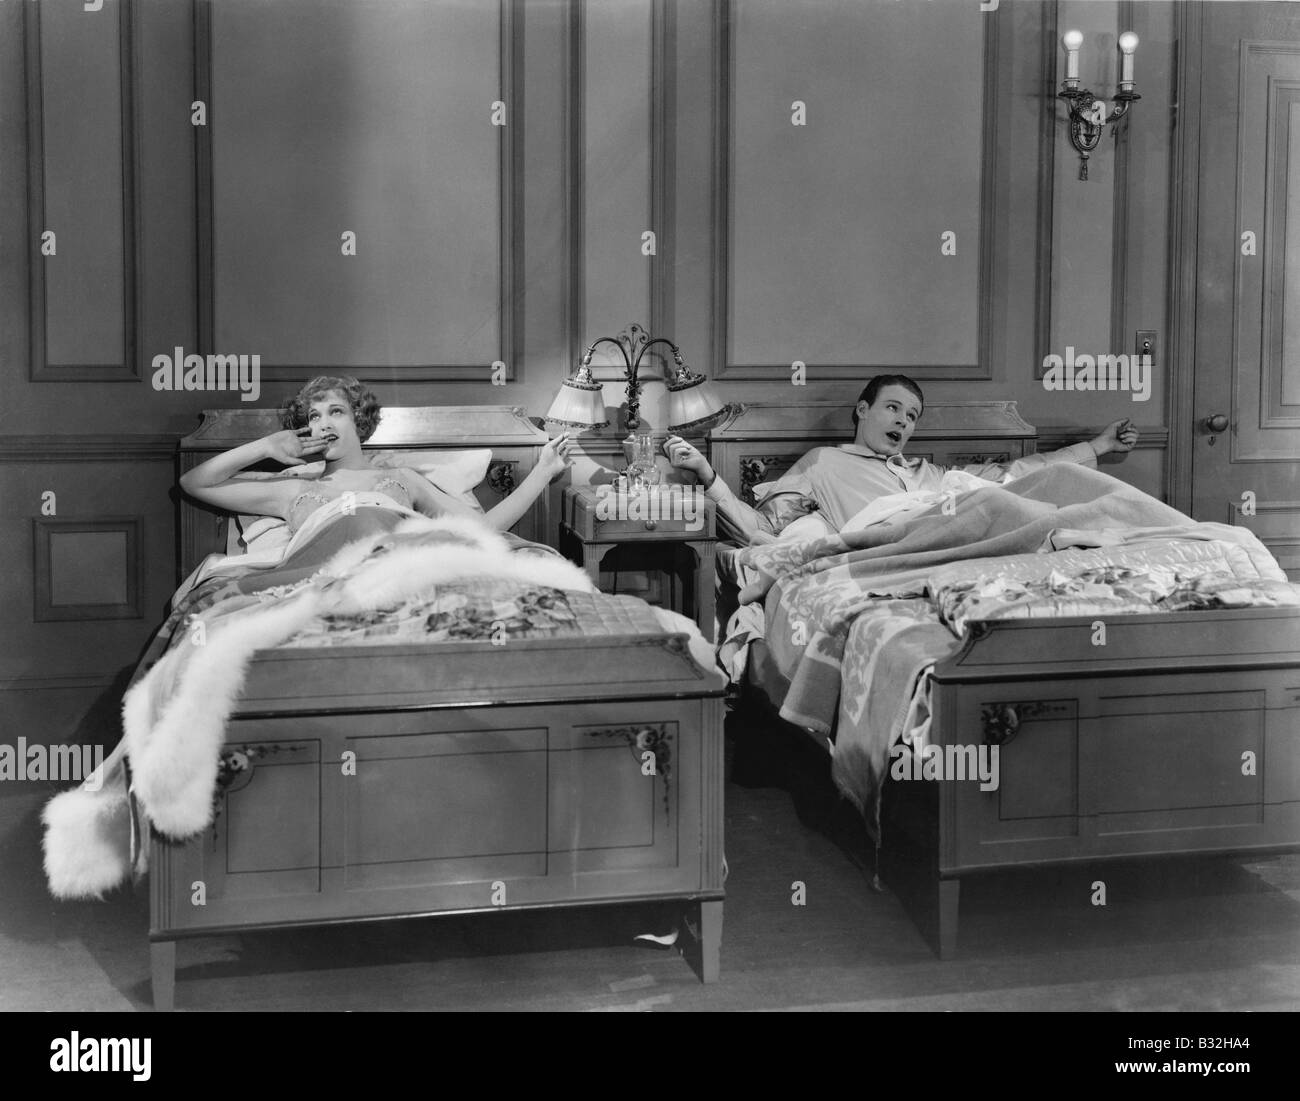 TWIN BEDS Stock Photo